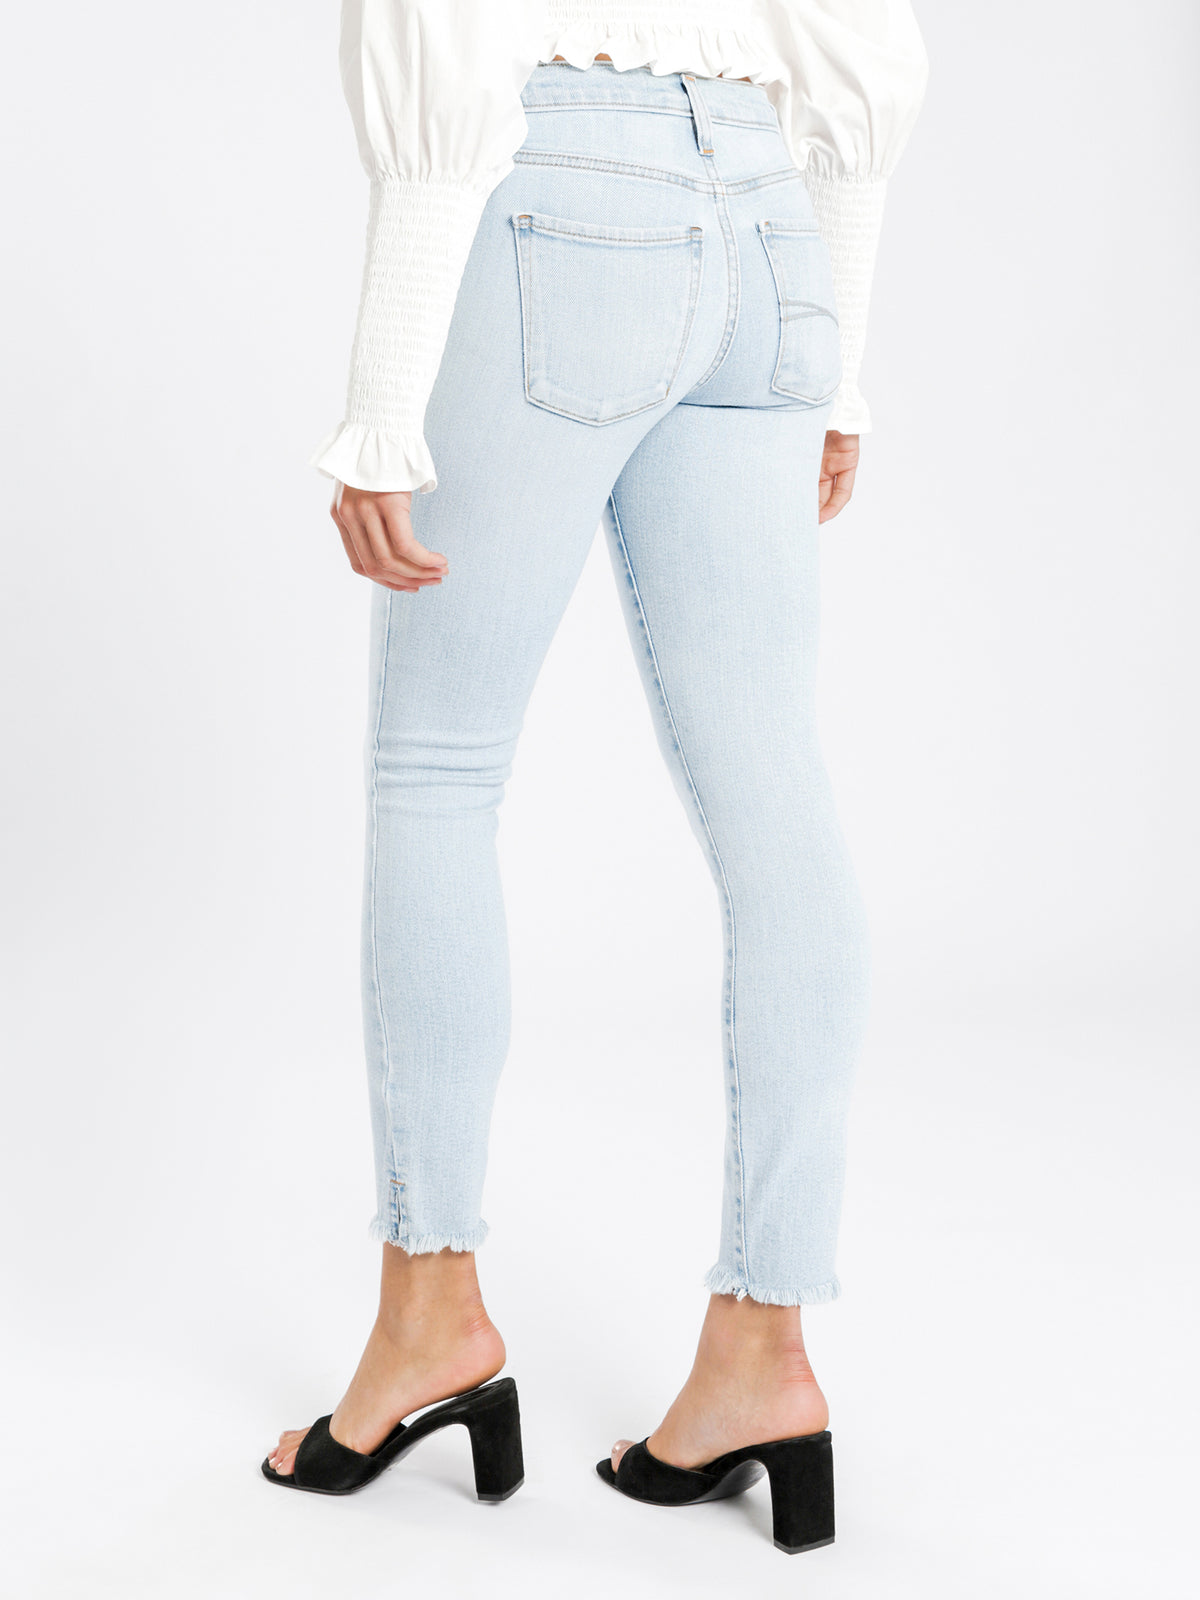 Geo Mid-Rise Skinny Ankle Jeans in Light Authentic Blue Denim